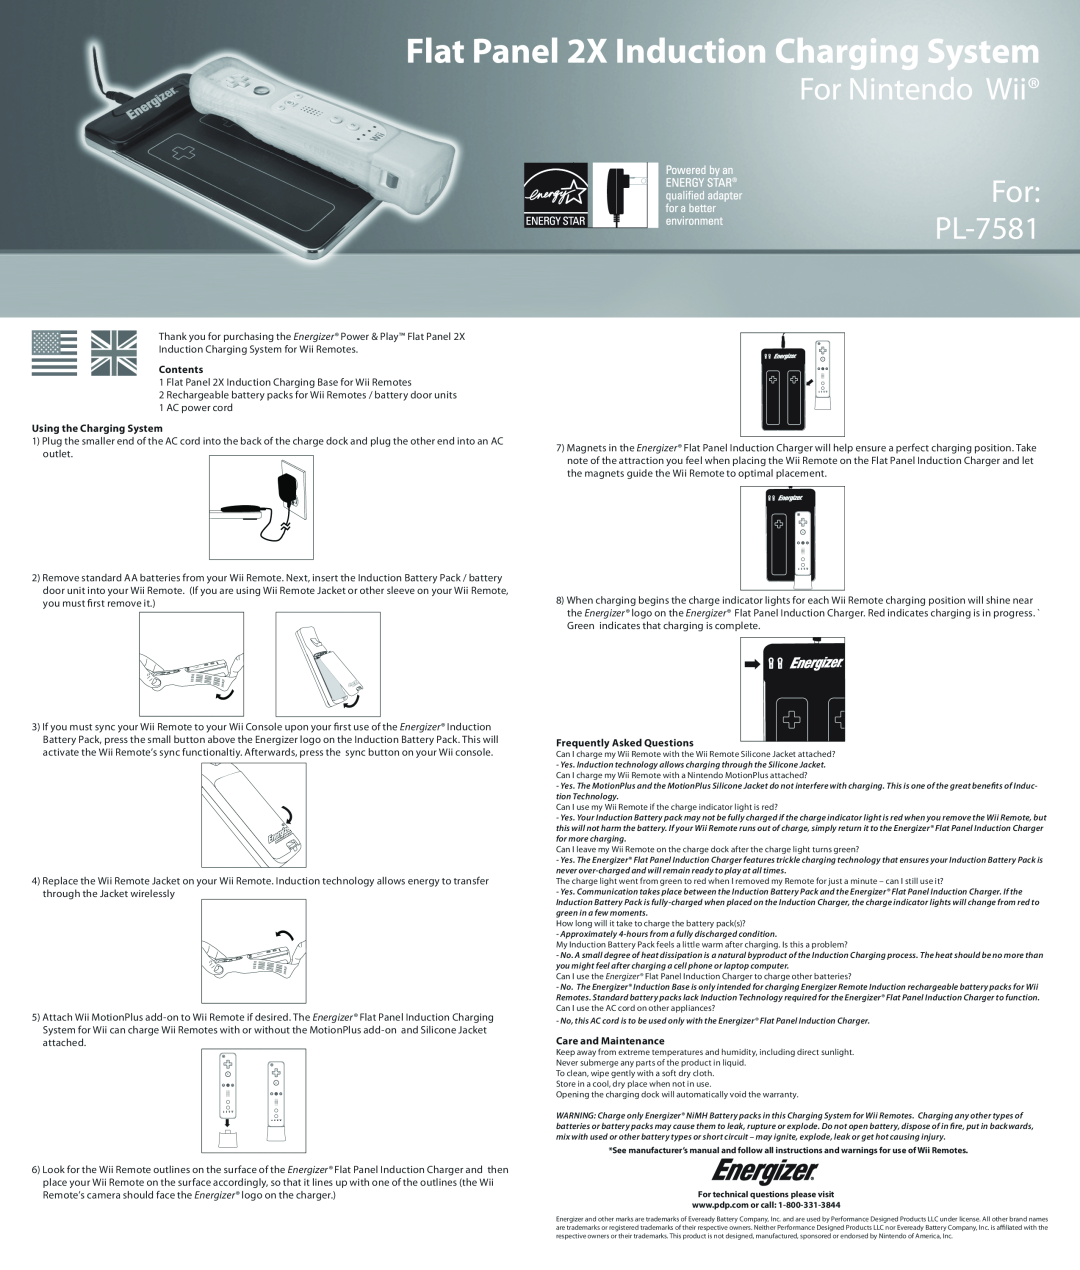 PDP PL-7581 manual Contents, Using the Charging System, Frequently Asked Questions, Care and Maintenance 